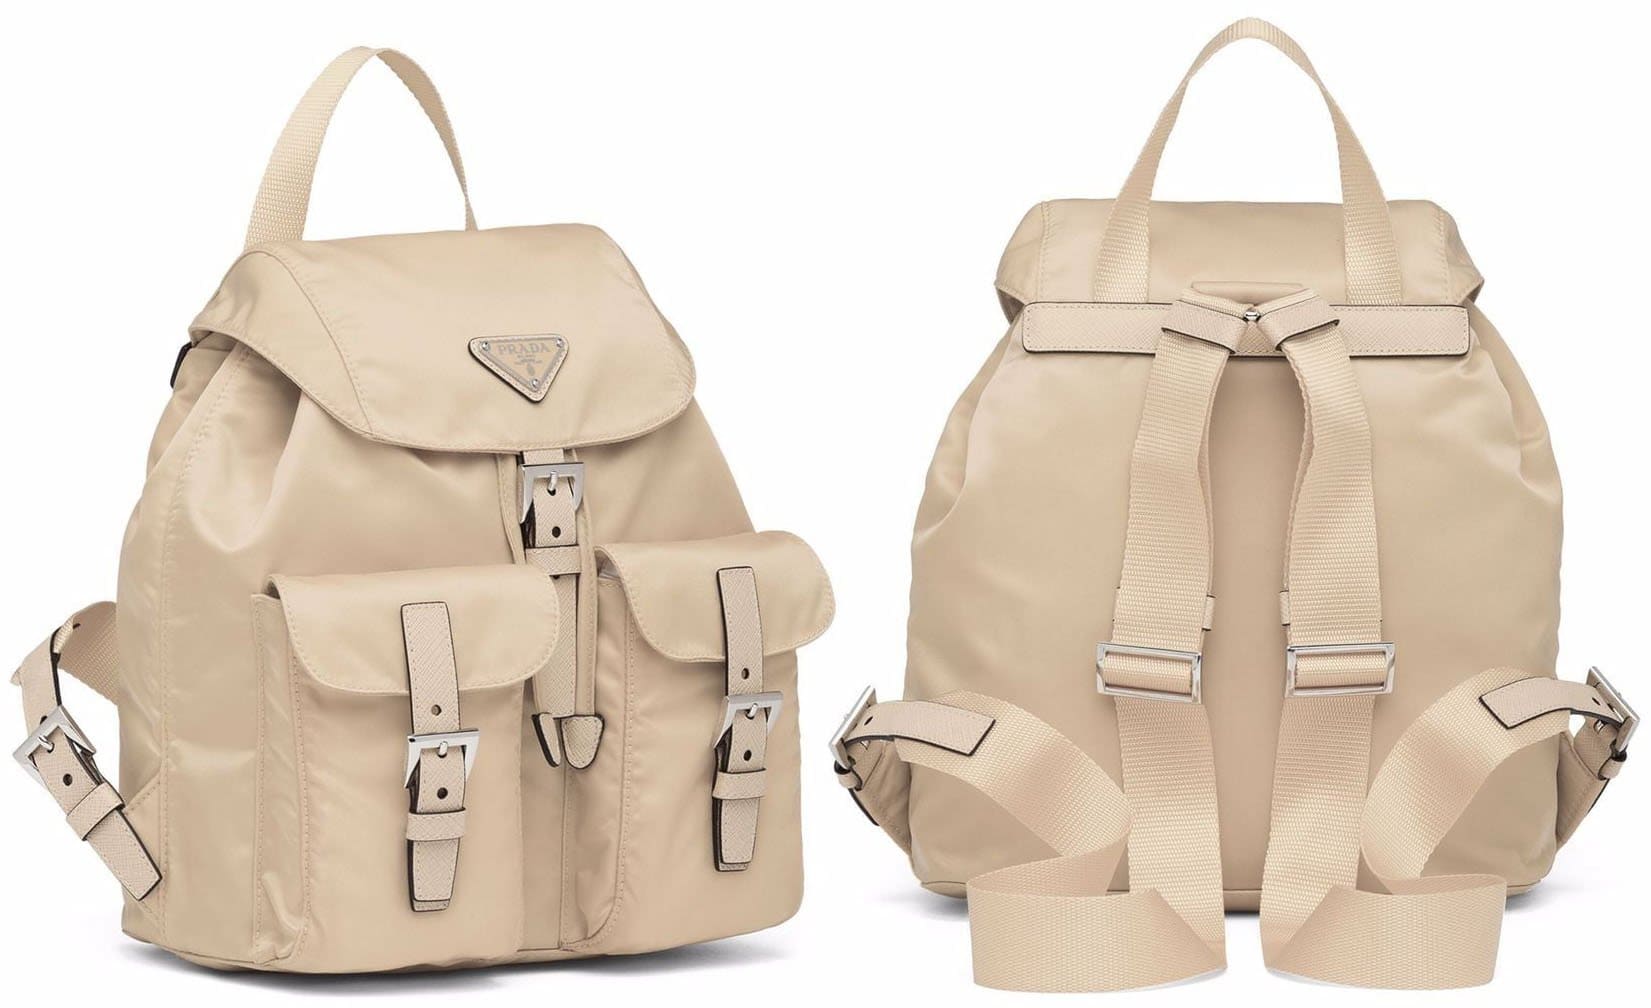 Offering refined elegance, Prada's Re-Nylon backpack is presented in a minimalist desert beige iteration adorned with the brand's signature logo plaque